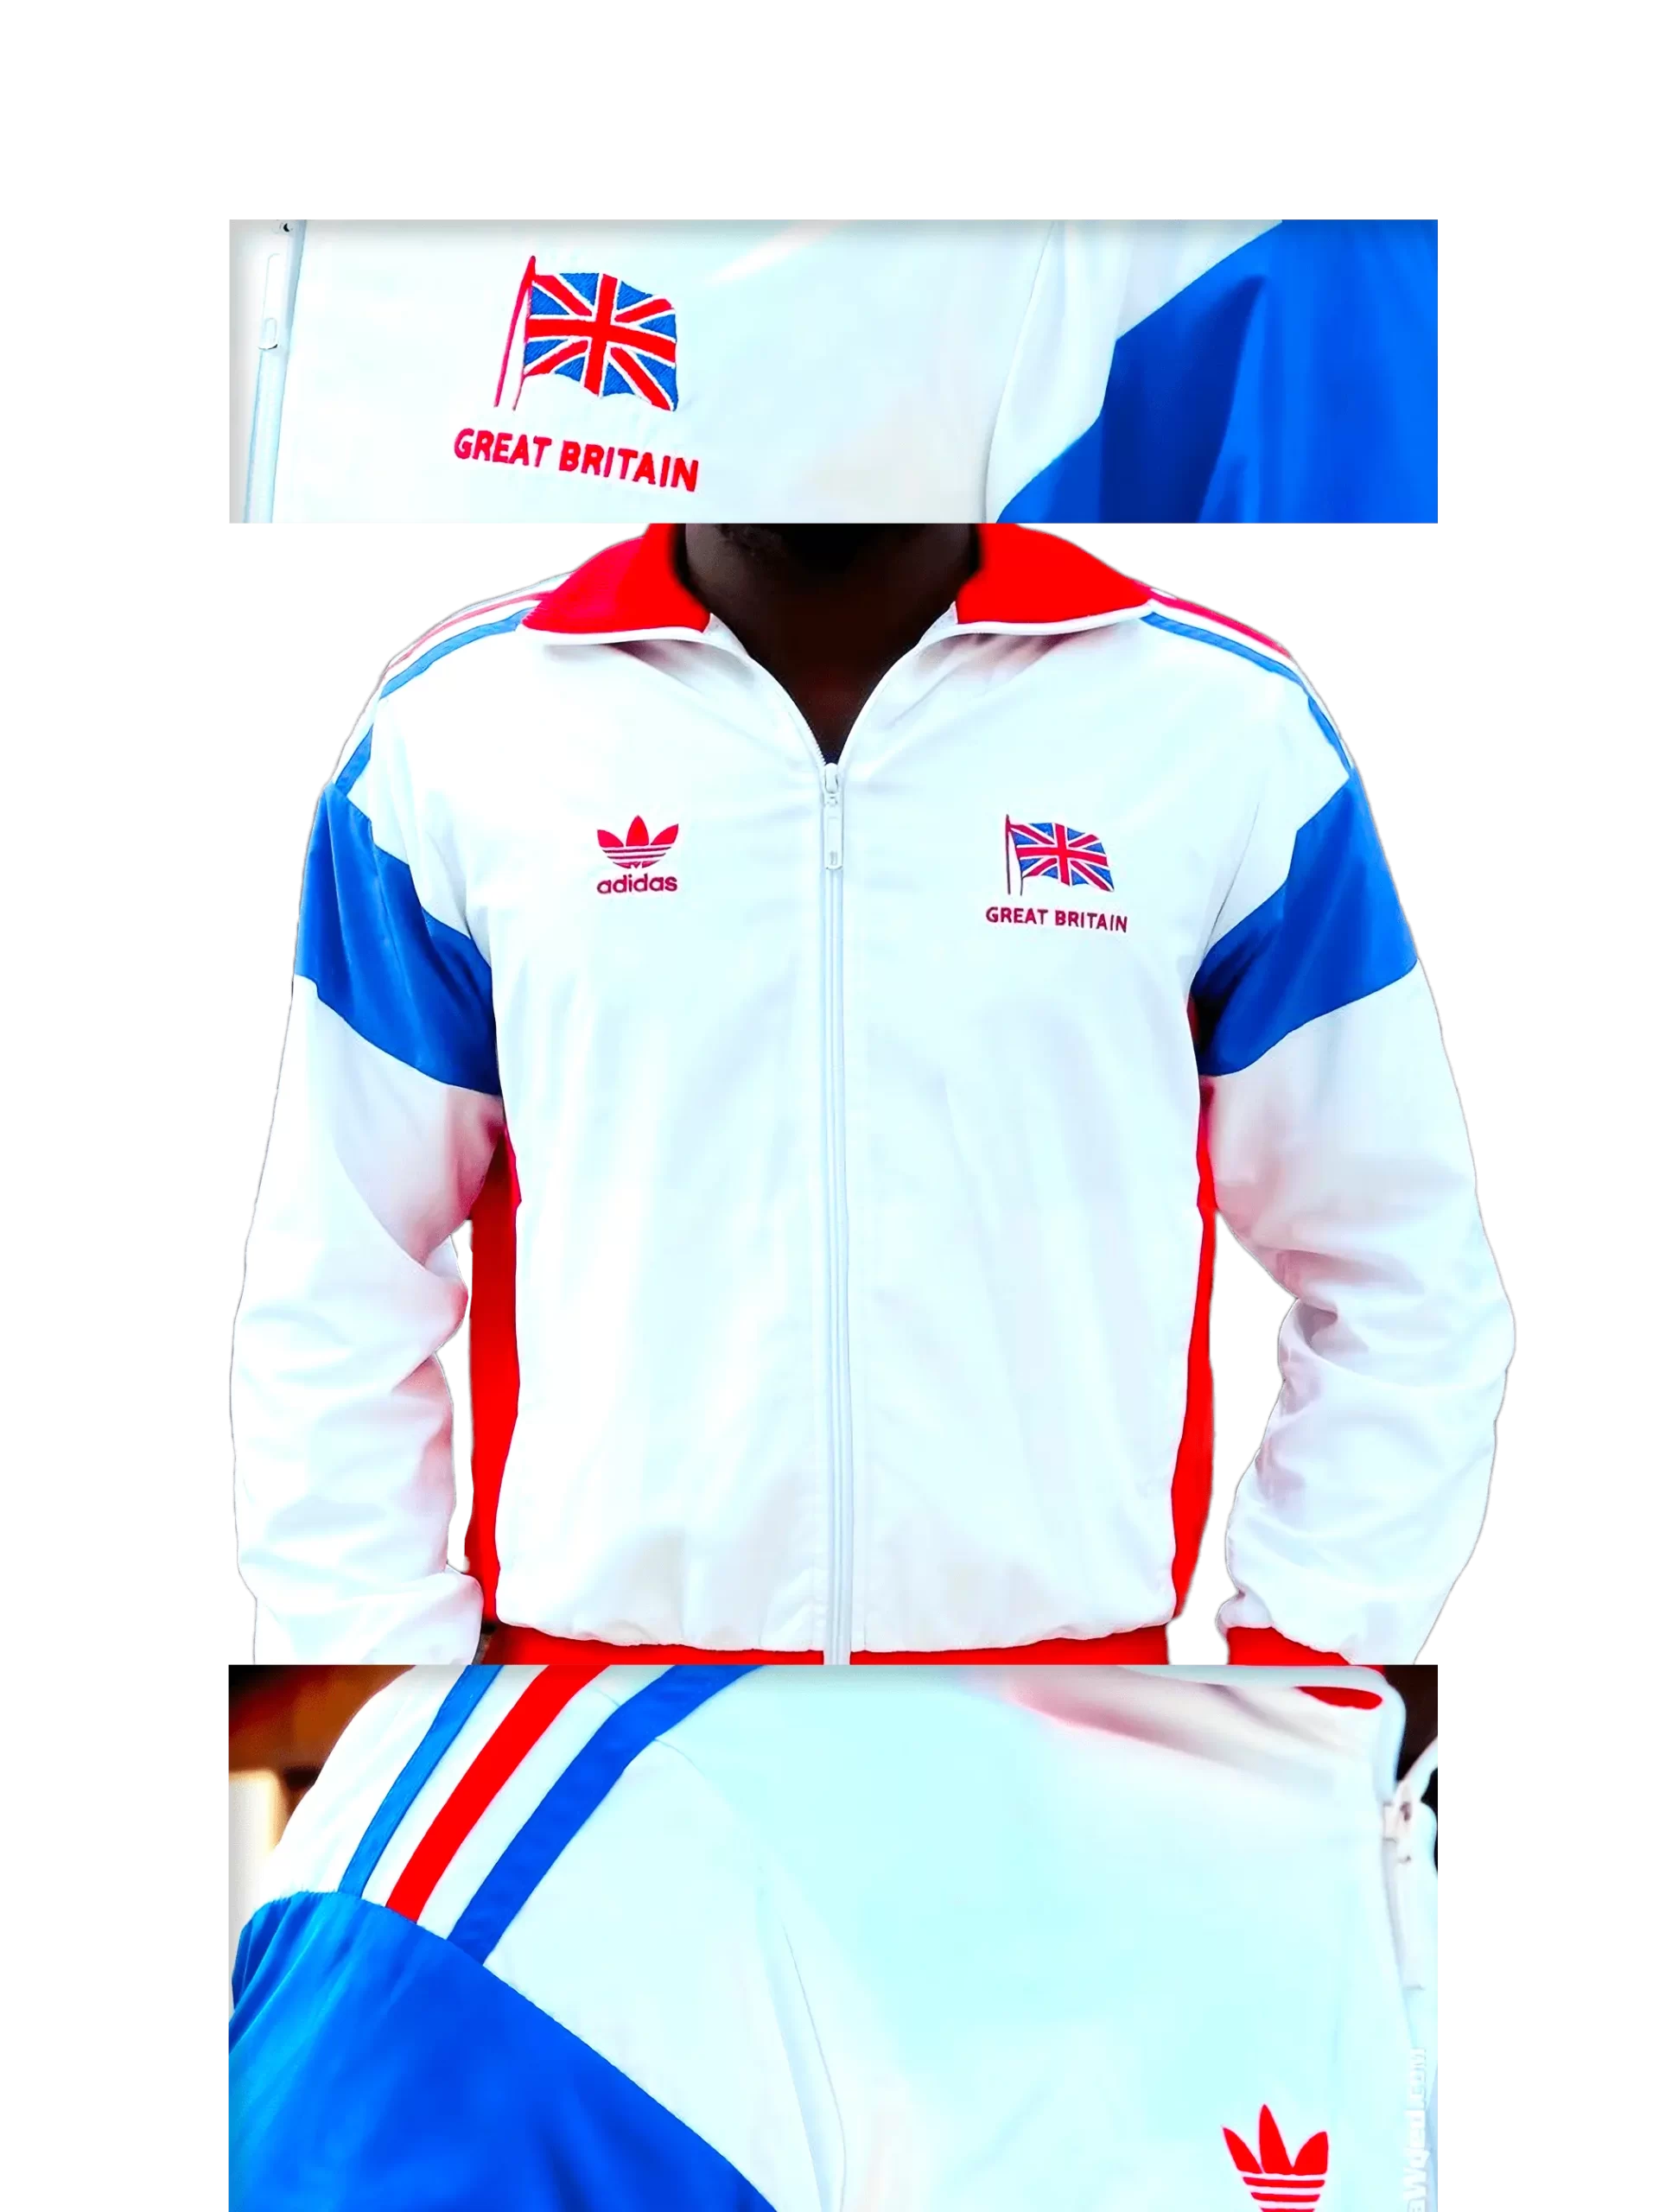 Men's 2005 Great Britain Olympic '84 TT by Adidas: Supported (EnLawded.com file #lmchk81000ip2y124787kg9st)